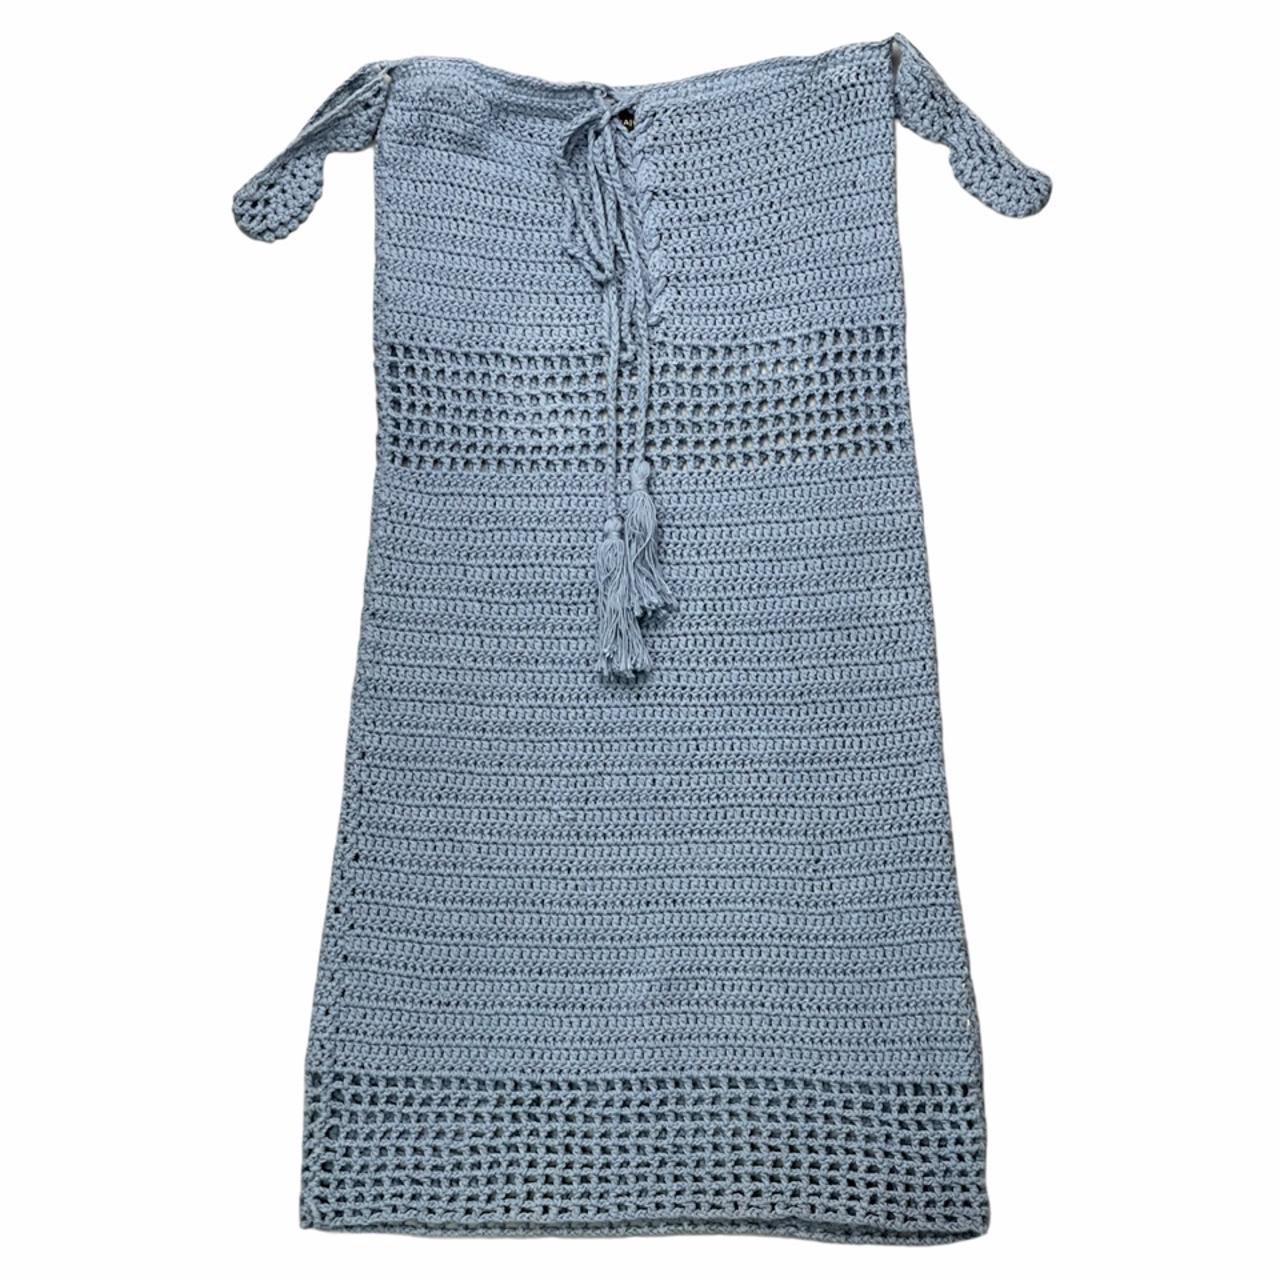 Product Image 1 - Majorelle blue crochet dress with